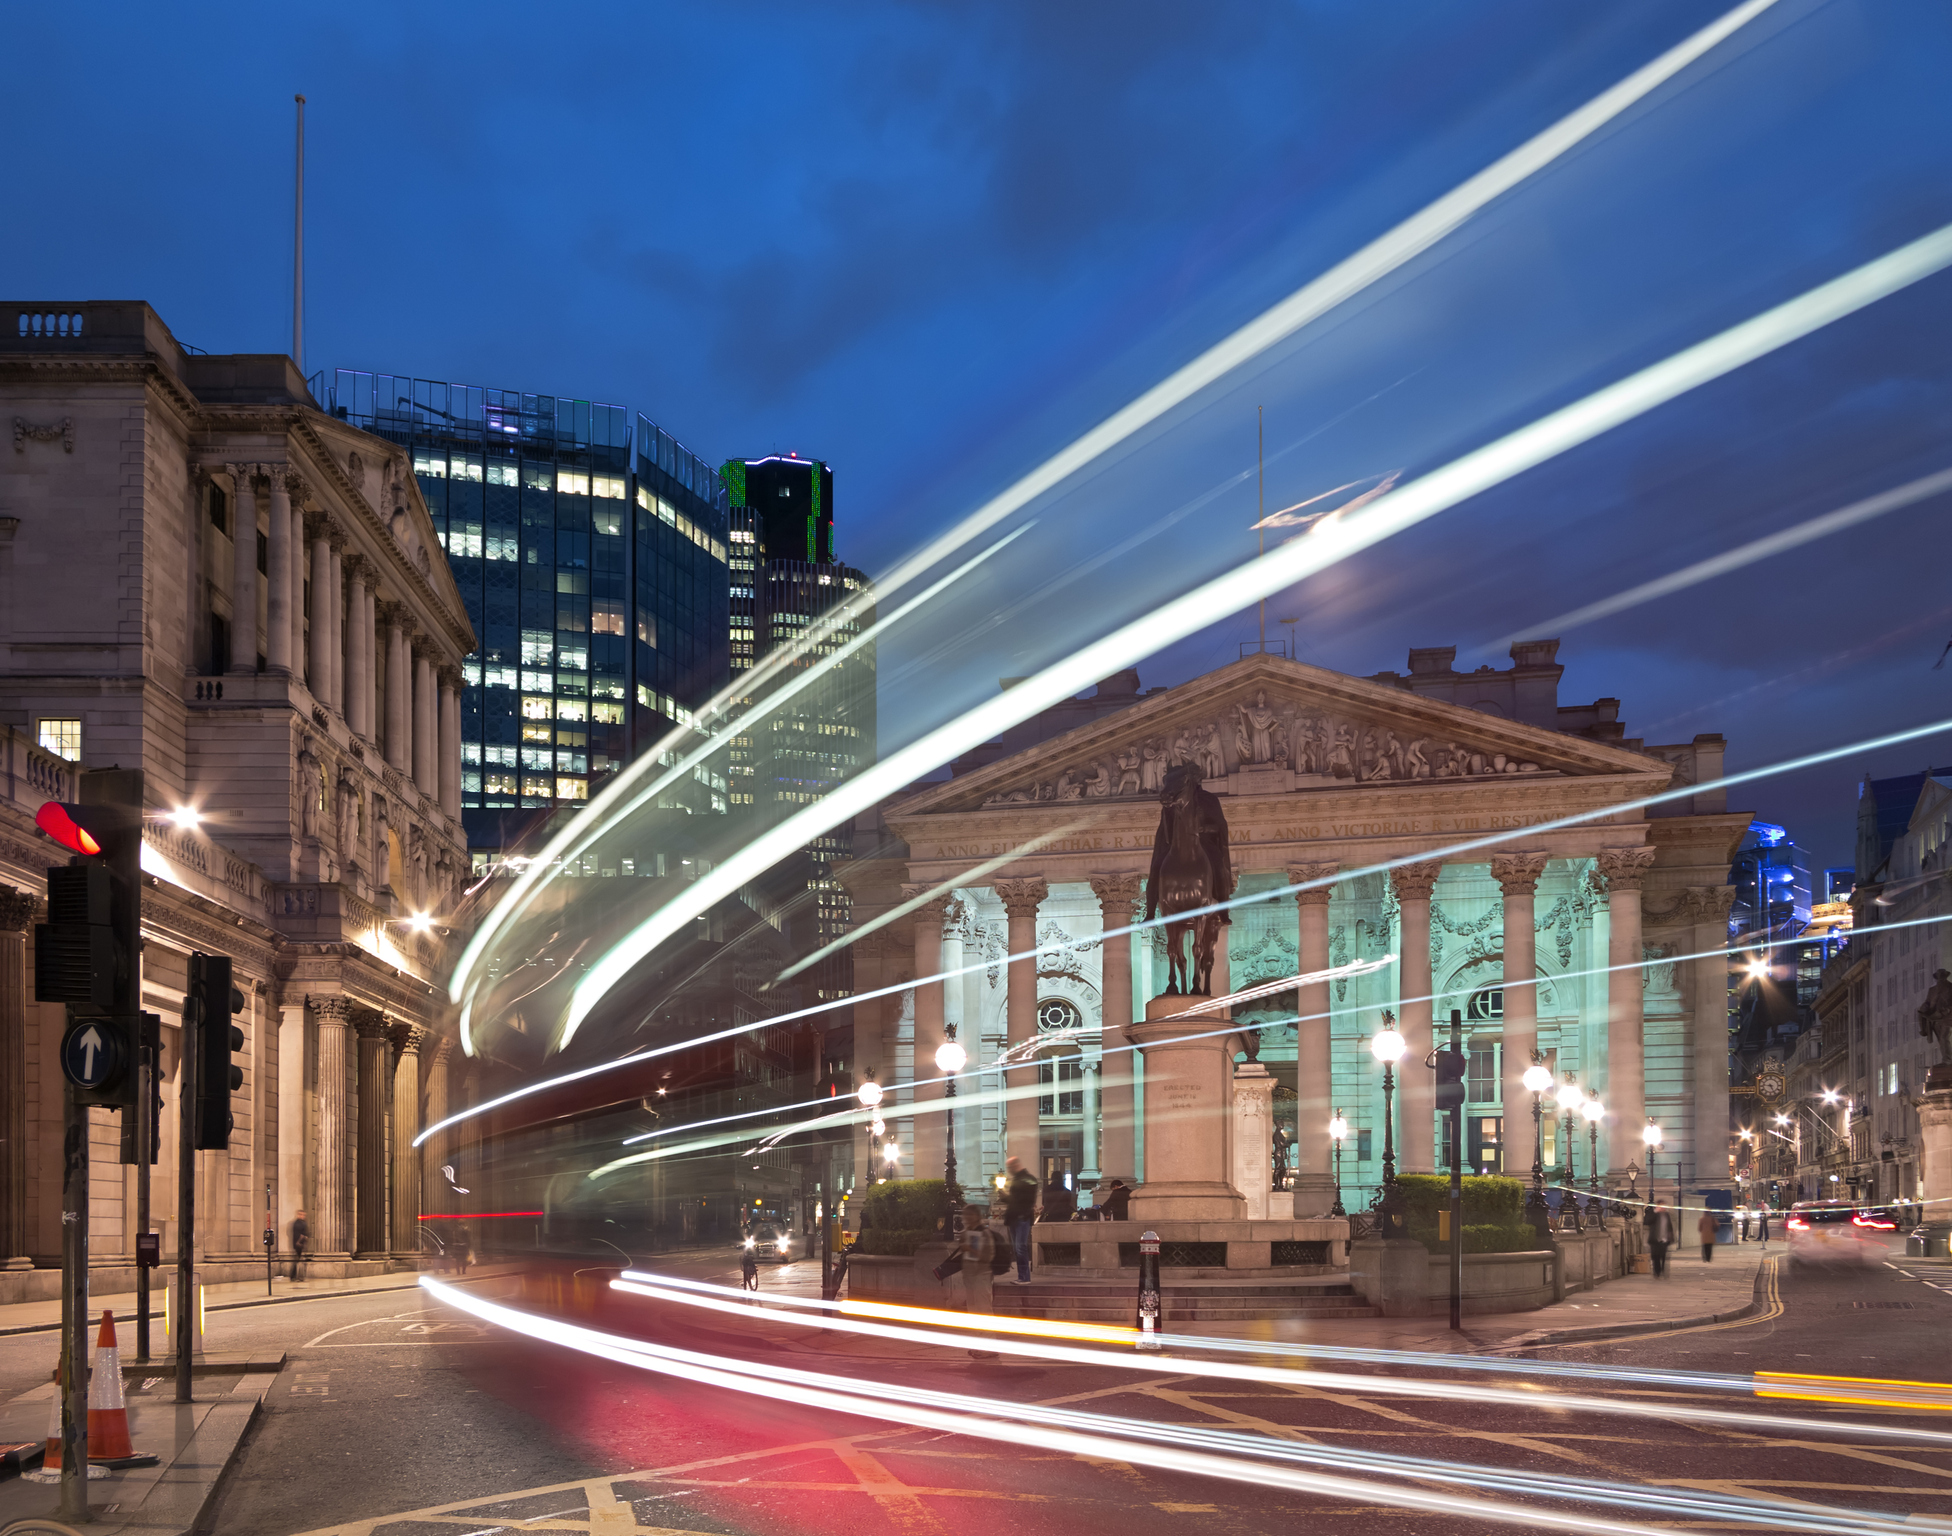 A bus going past the Bank of England at night